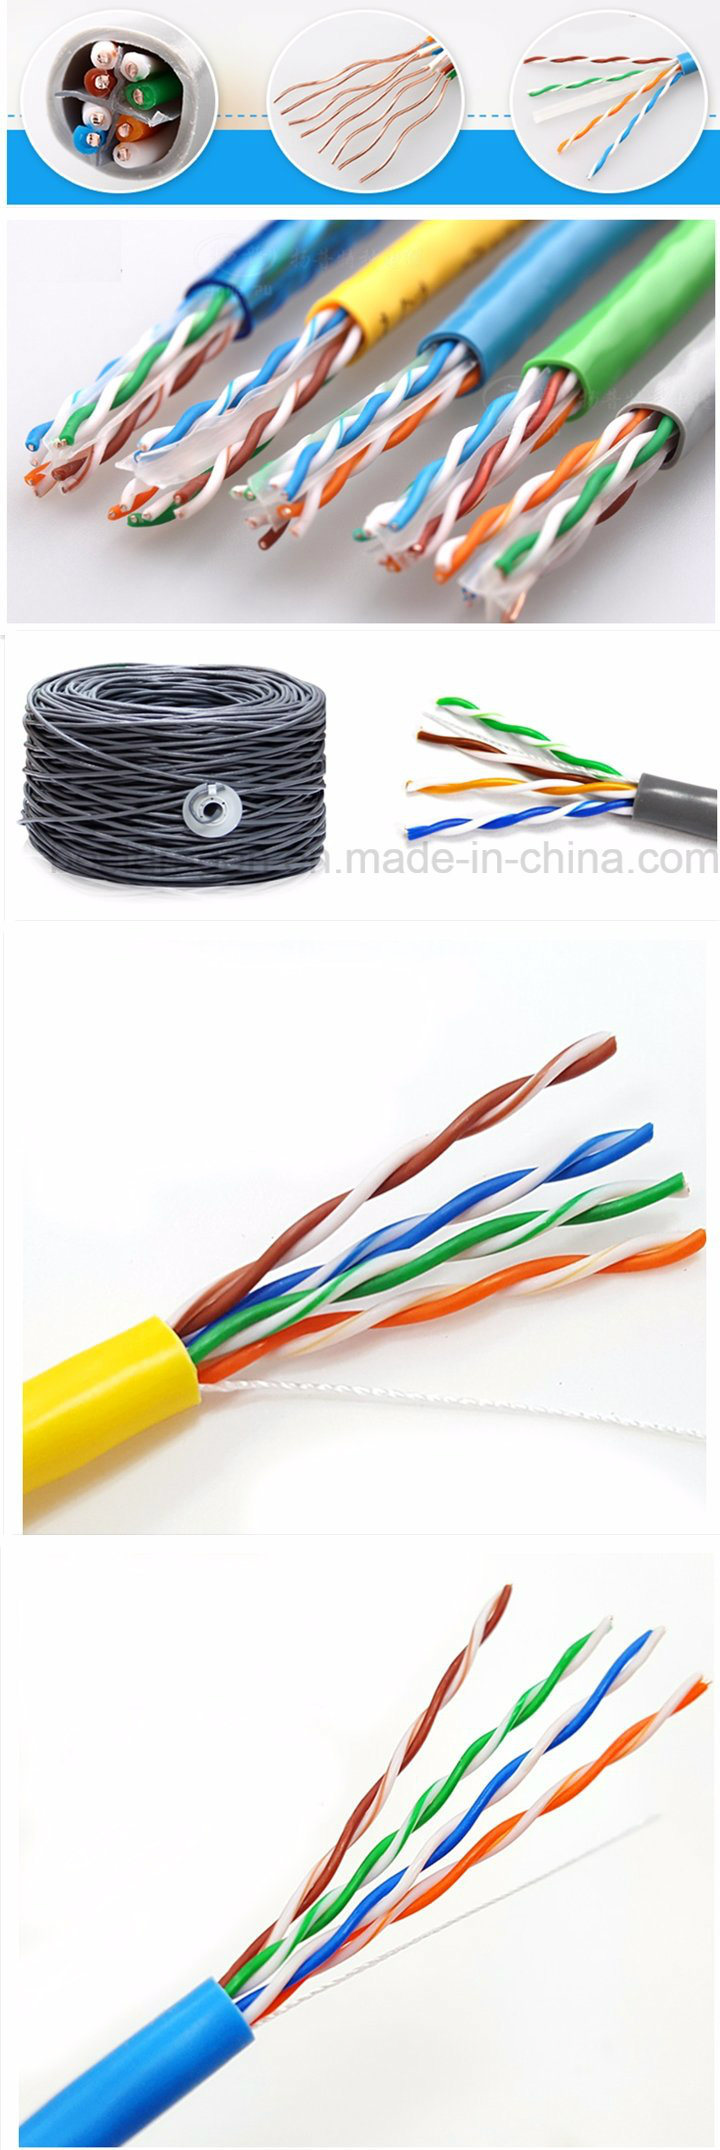 100FT Ethernet Computer UTP Cat5 Cat5e CAT6A LAN Cable / Network Cable